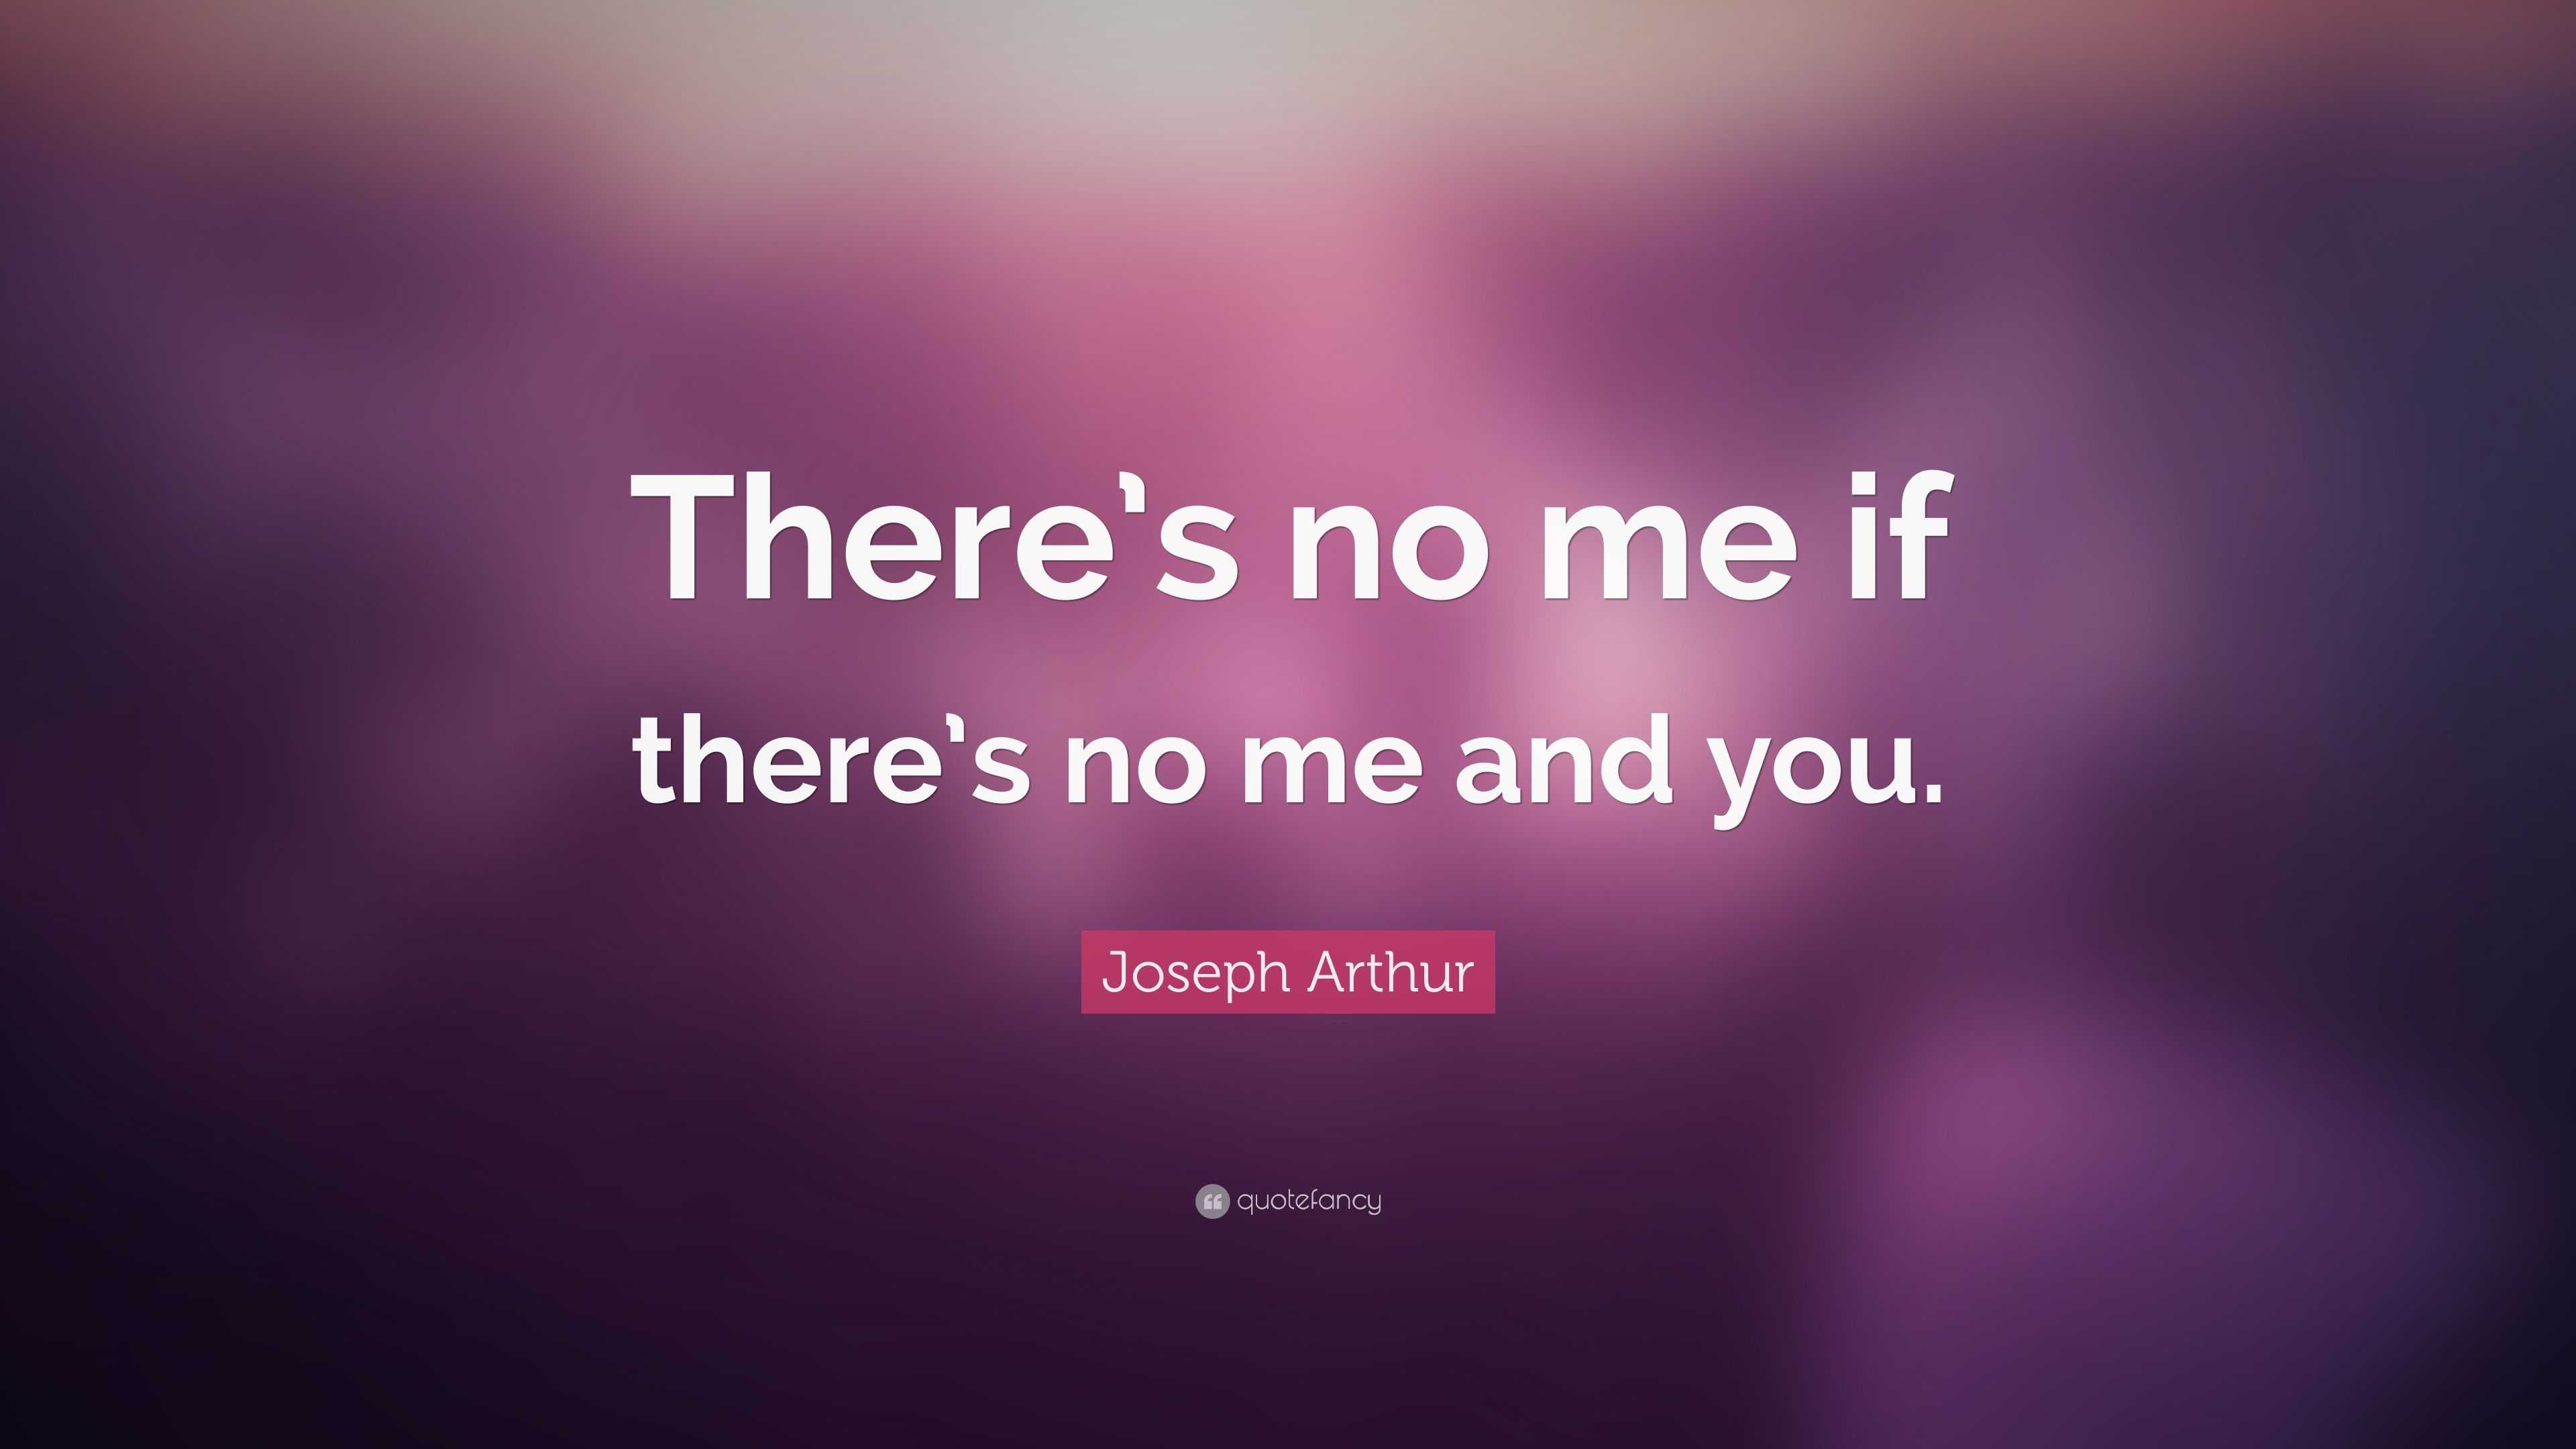 Joseph Arthur Quote: “There’s no me if there’s no me and you.”